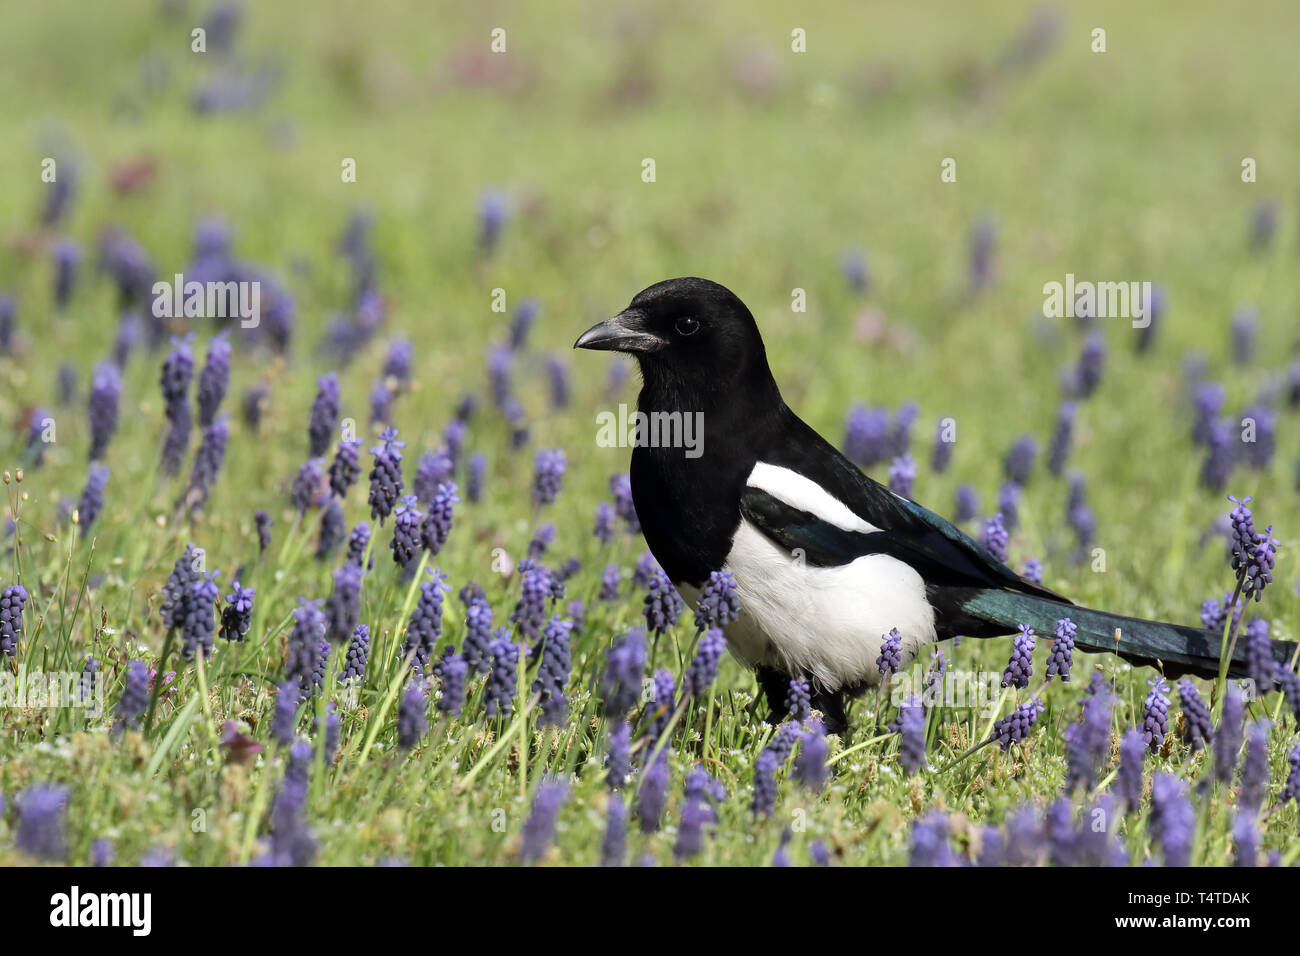 Black and white magpie, considered one of the most intelligent animals, among purple grape hyacinths Stock Photo